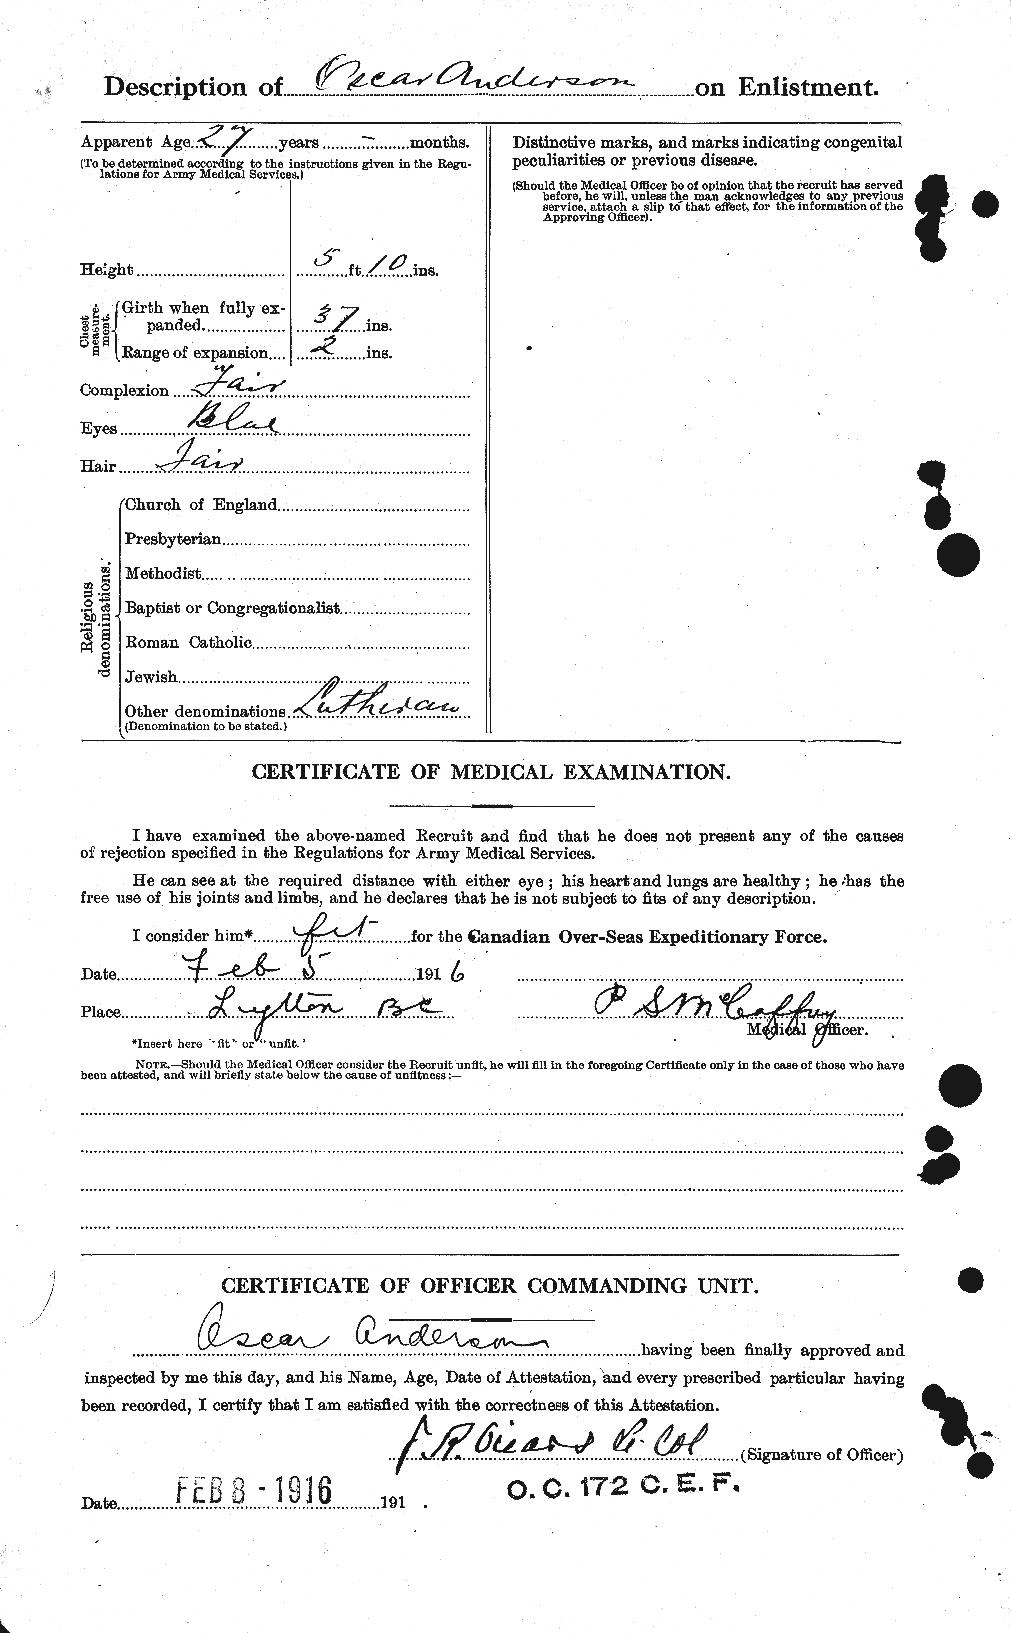 Personnel Records of the First World War - CEF 207386b